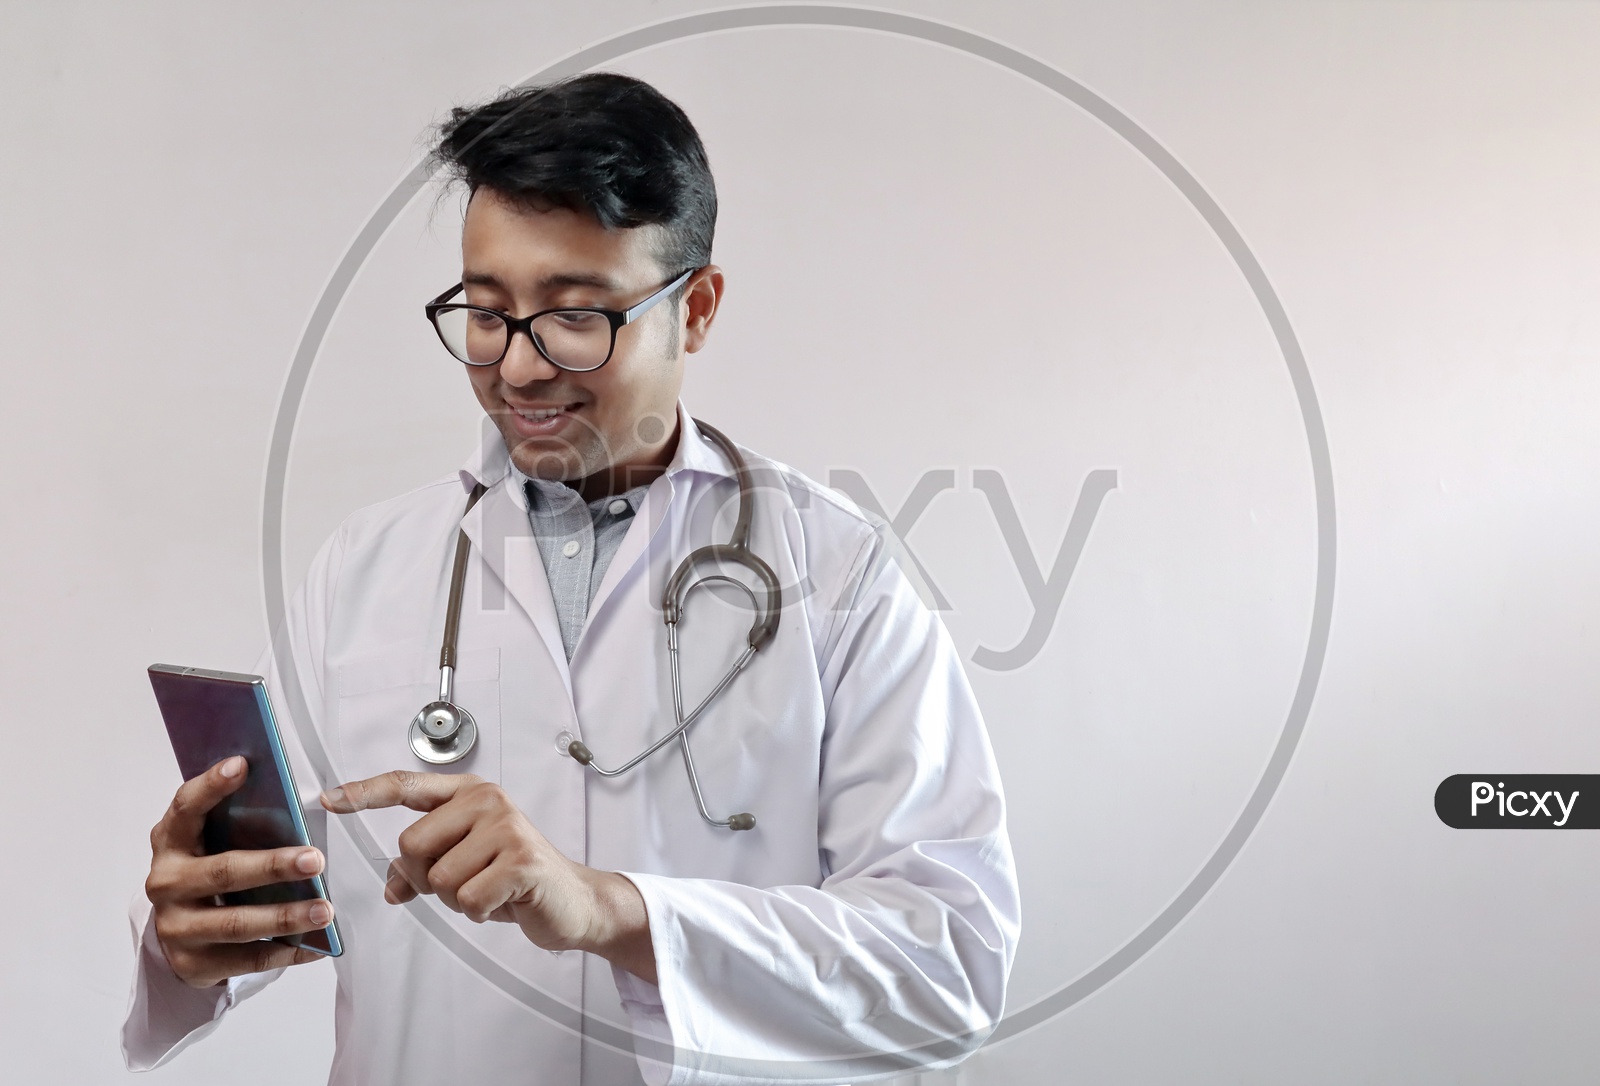 Male Indian Doctor In White Coat And Stethoscope Touching Smart Phone or Mobile